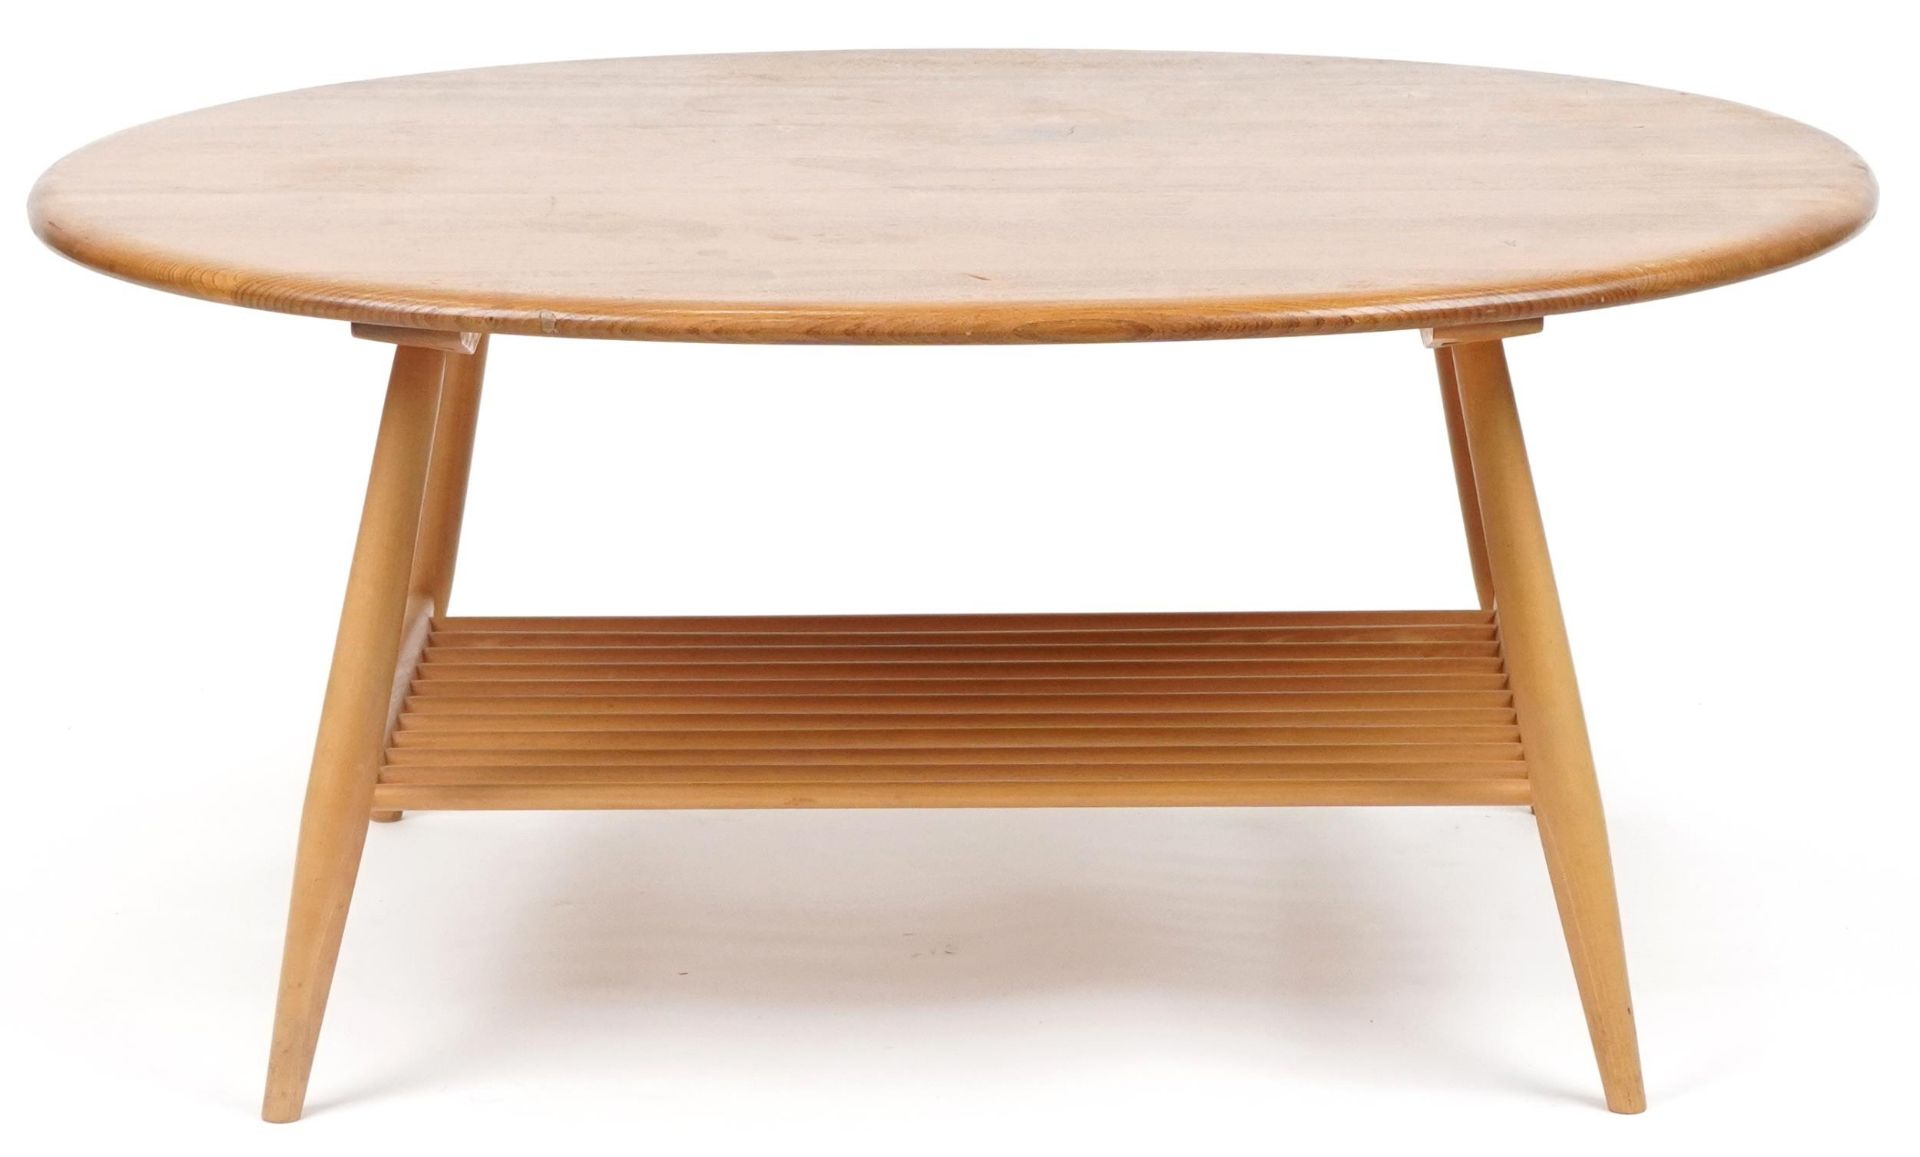 Ercol light elm coffee table with oval top, 44cm H x 99cm W x 82cm D - Image 4 of 5